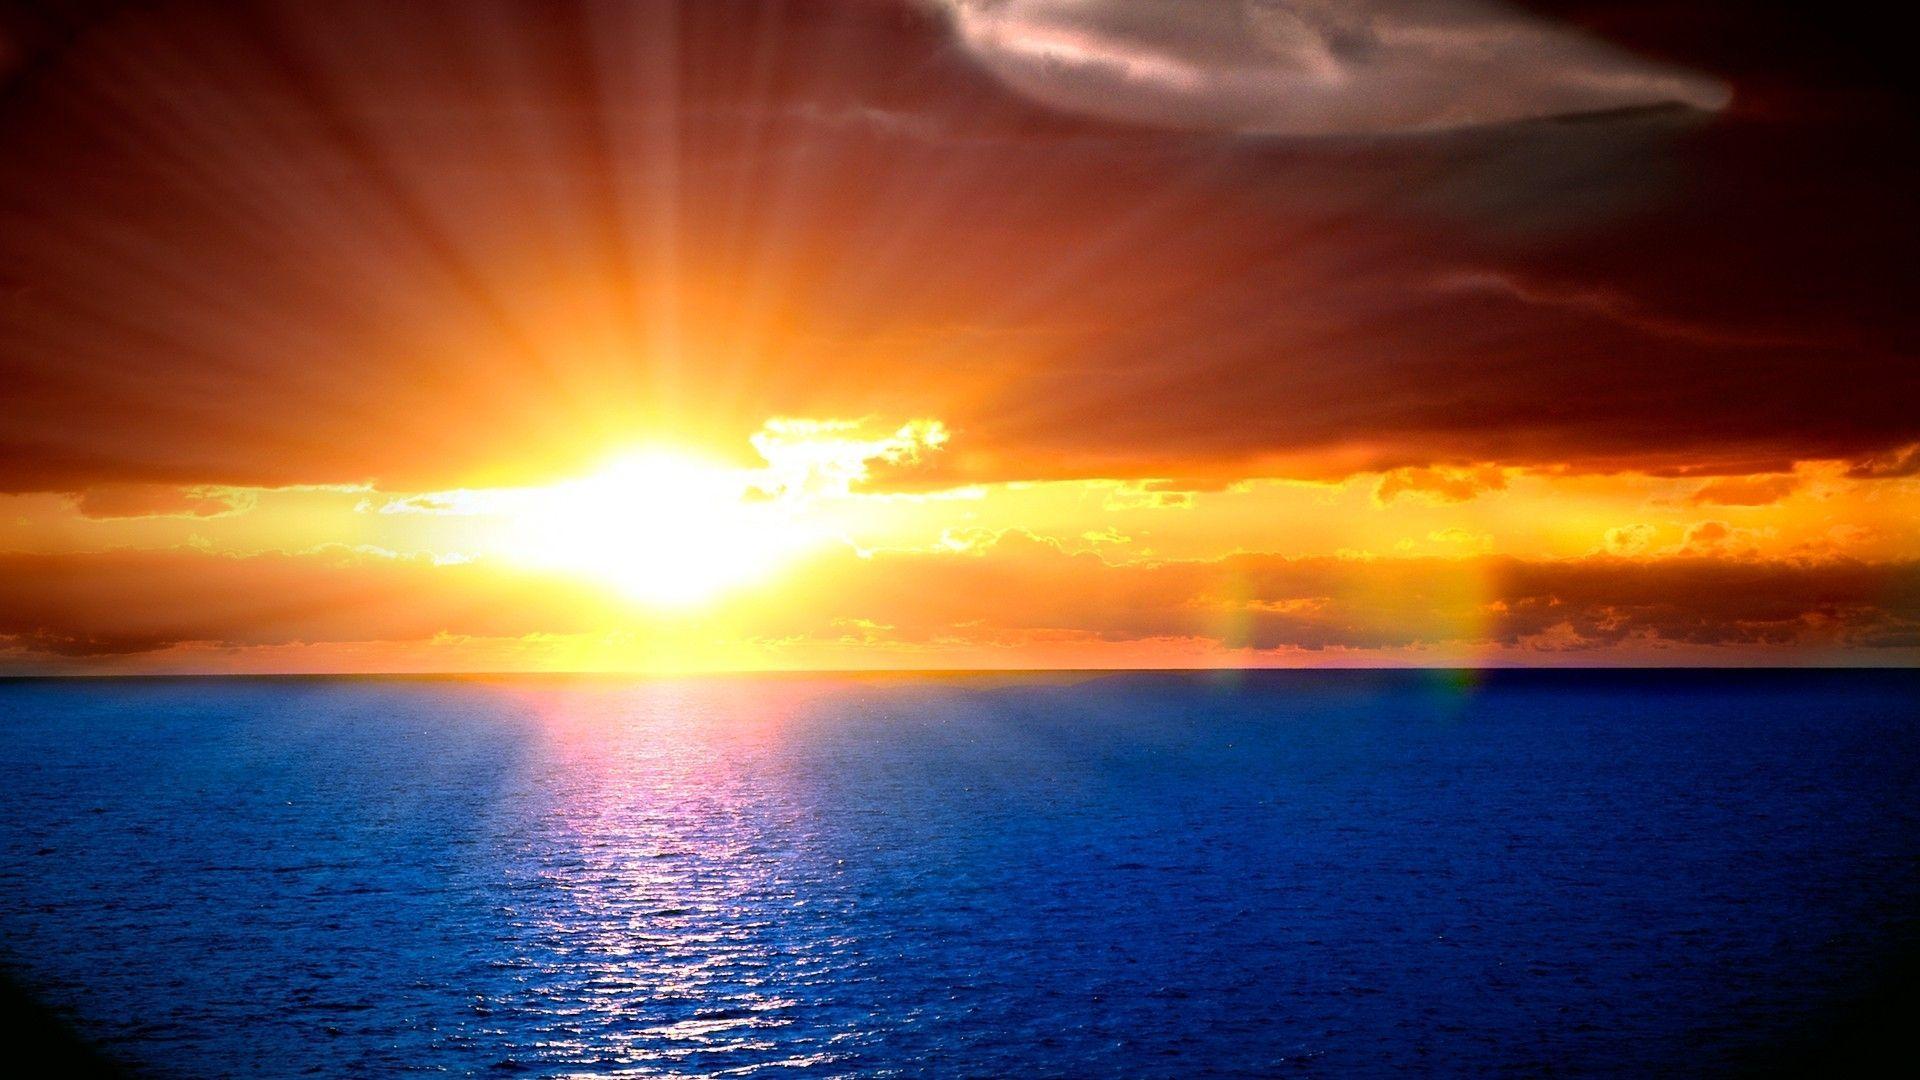 Sunset On The Ocean Wallpaper Cool #le4b2x 1920x1080 px 981.43 KB